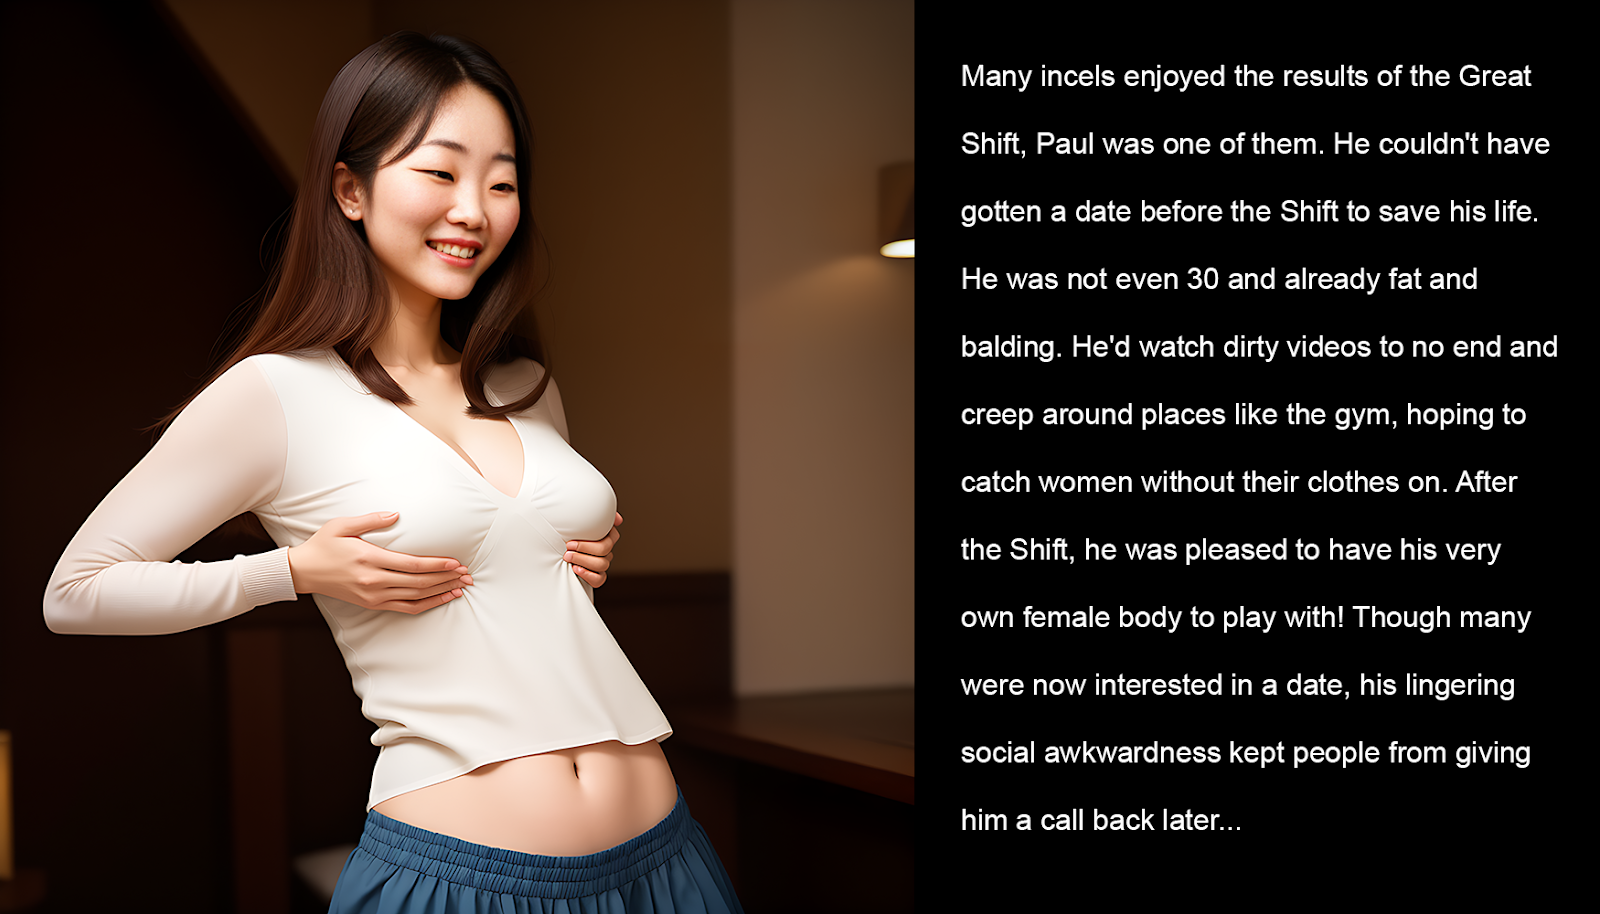 Many incels enjoyed the results of the Great Shift, Paul was one of them. He couldn't have gotten a date before the Shift to save his life. He was not even 30 and already fat and balding. He'd watch dirty videos to no end and creep around places like the gym, hoping to catch women without their clothes on. After the Shift, he was pleased to have his very own female body to play with! Though many were now interested in a date, his lingering social awkwardness kept people from giving him a call back later...